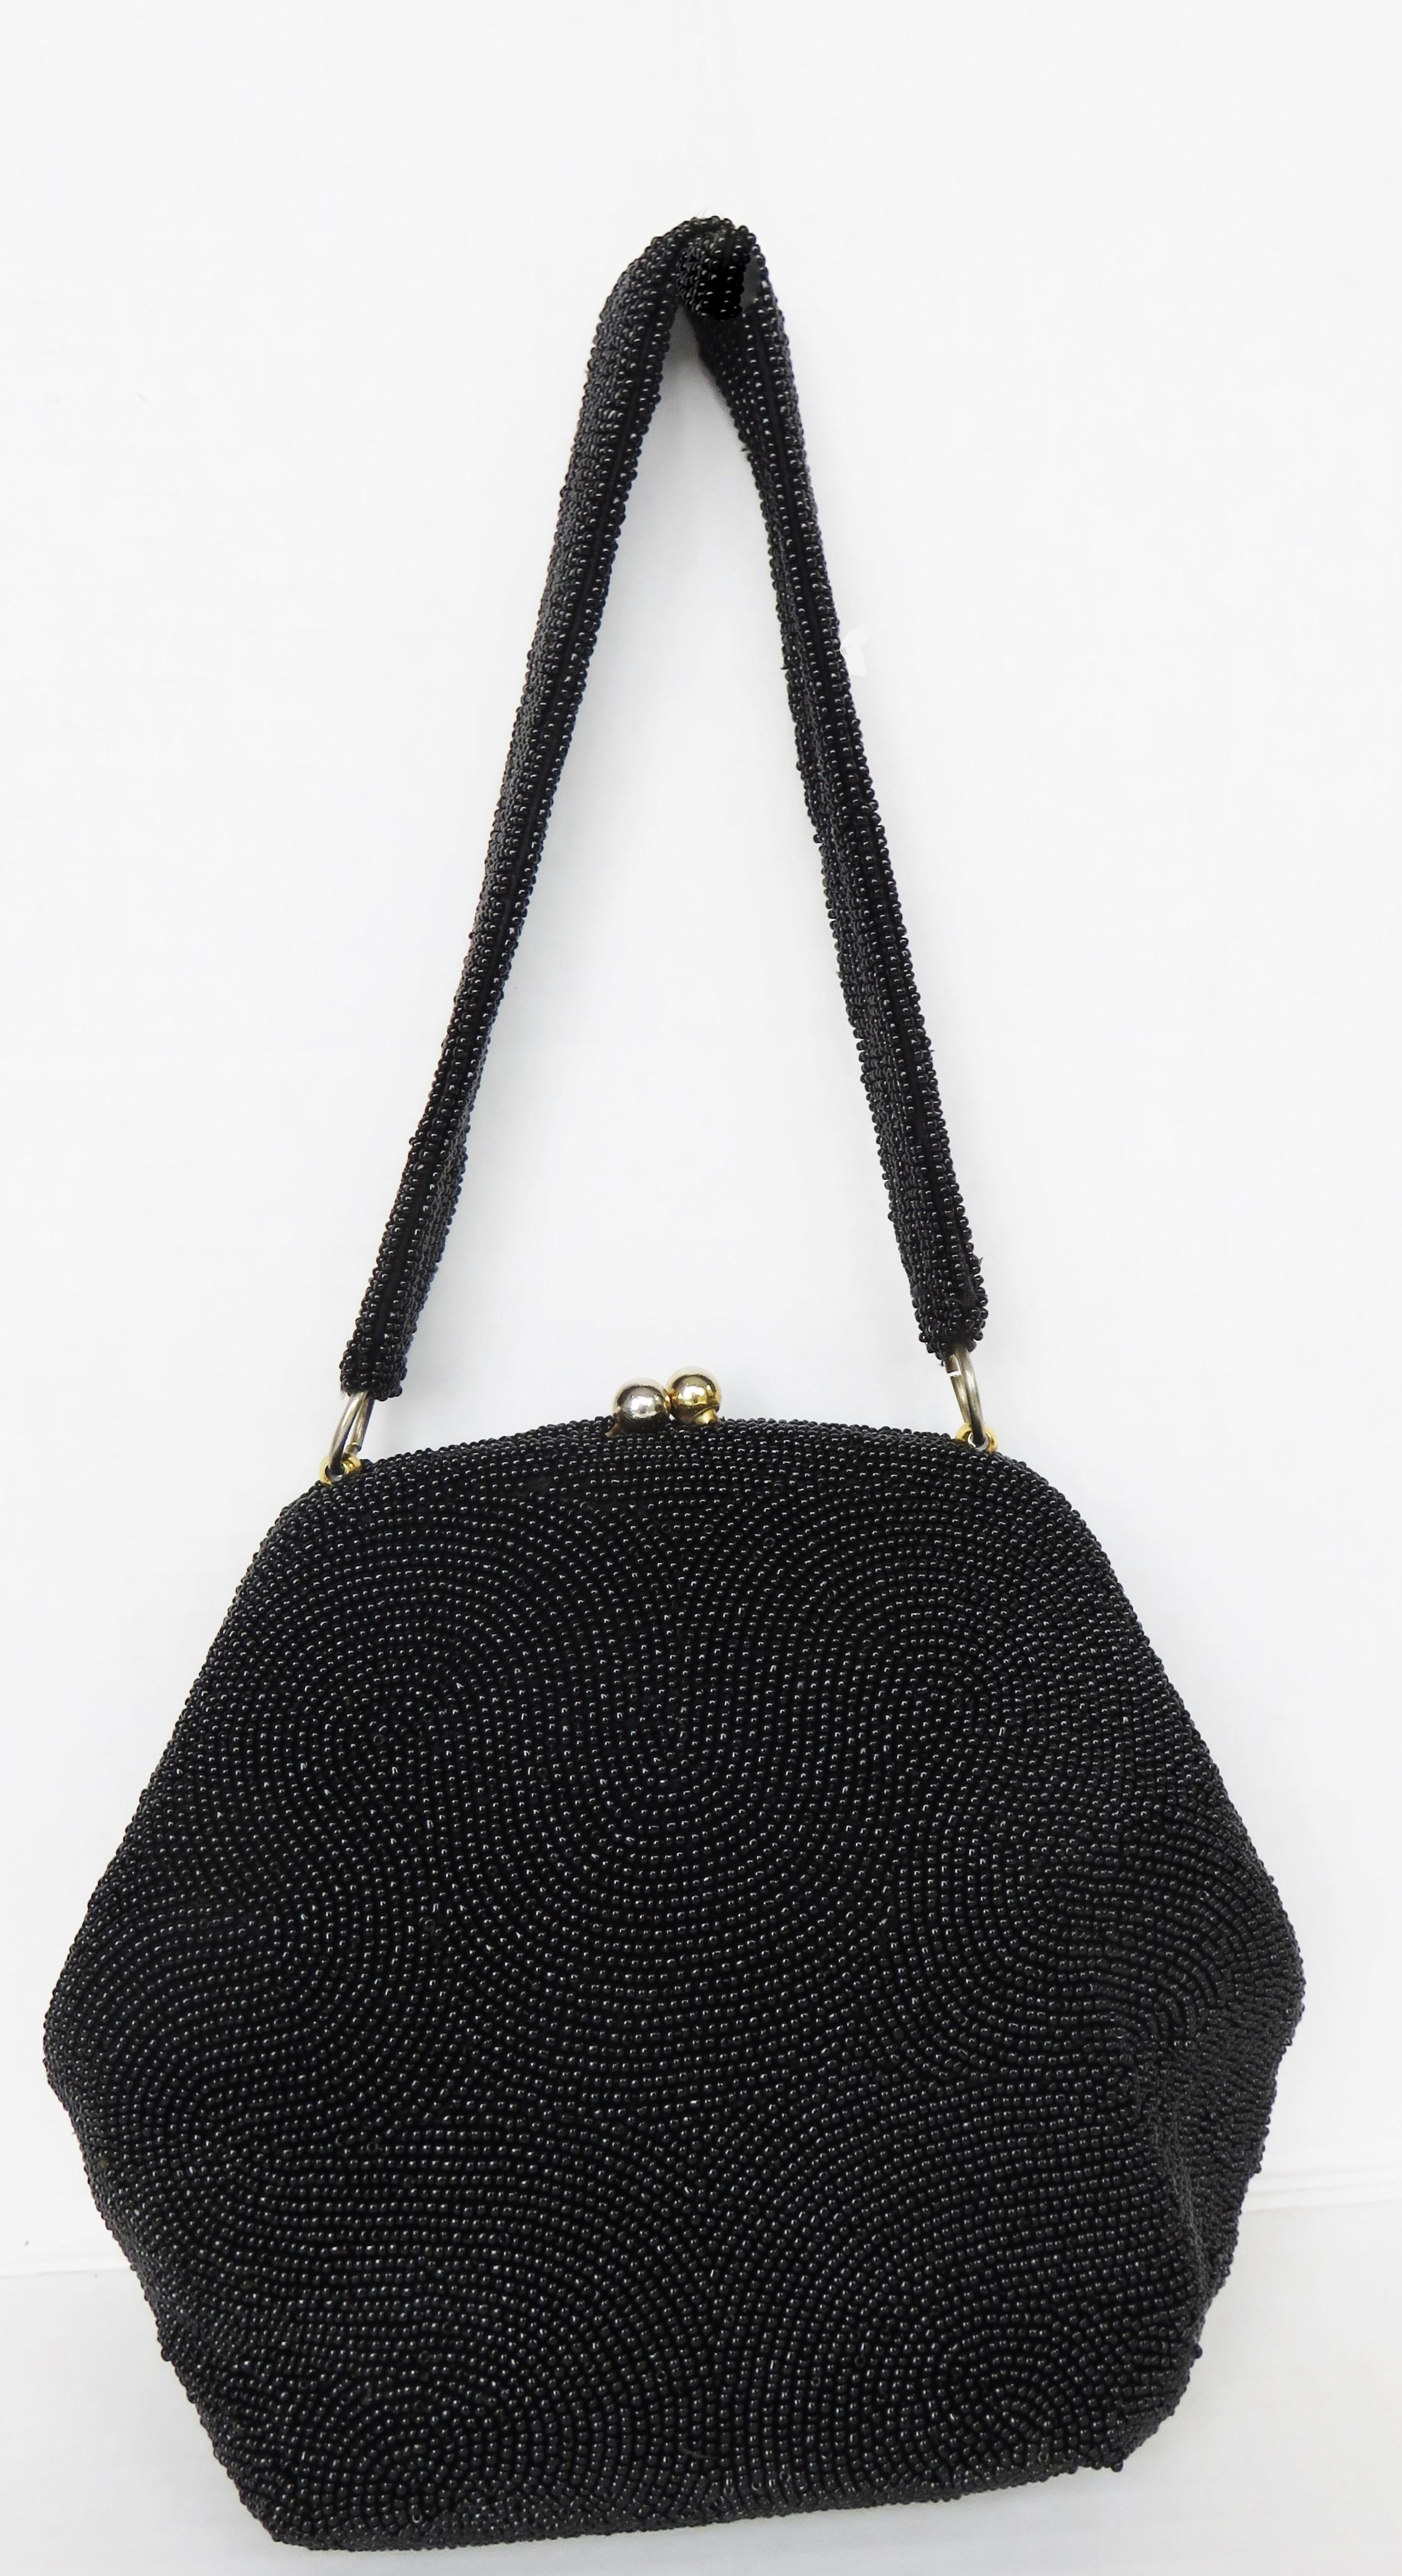 A gorgeous black glass seed beaded handbag in a great wave pattern by Josef.  It has a top handle, silk lining with a pocket and a gold clasp top closure.

Height  8